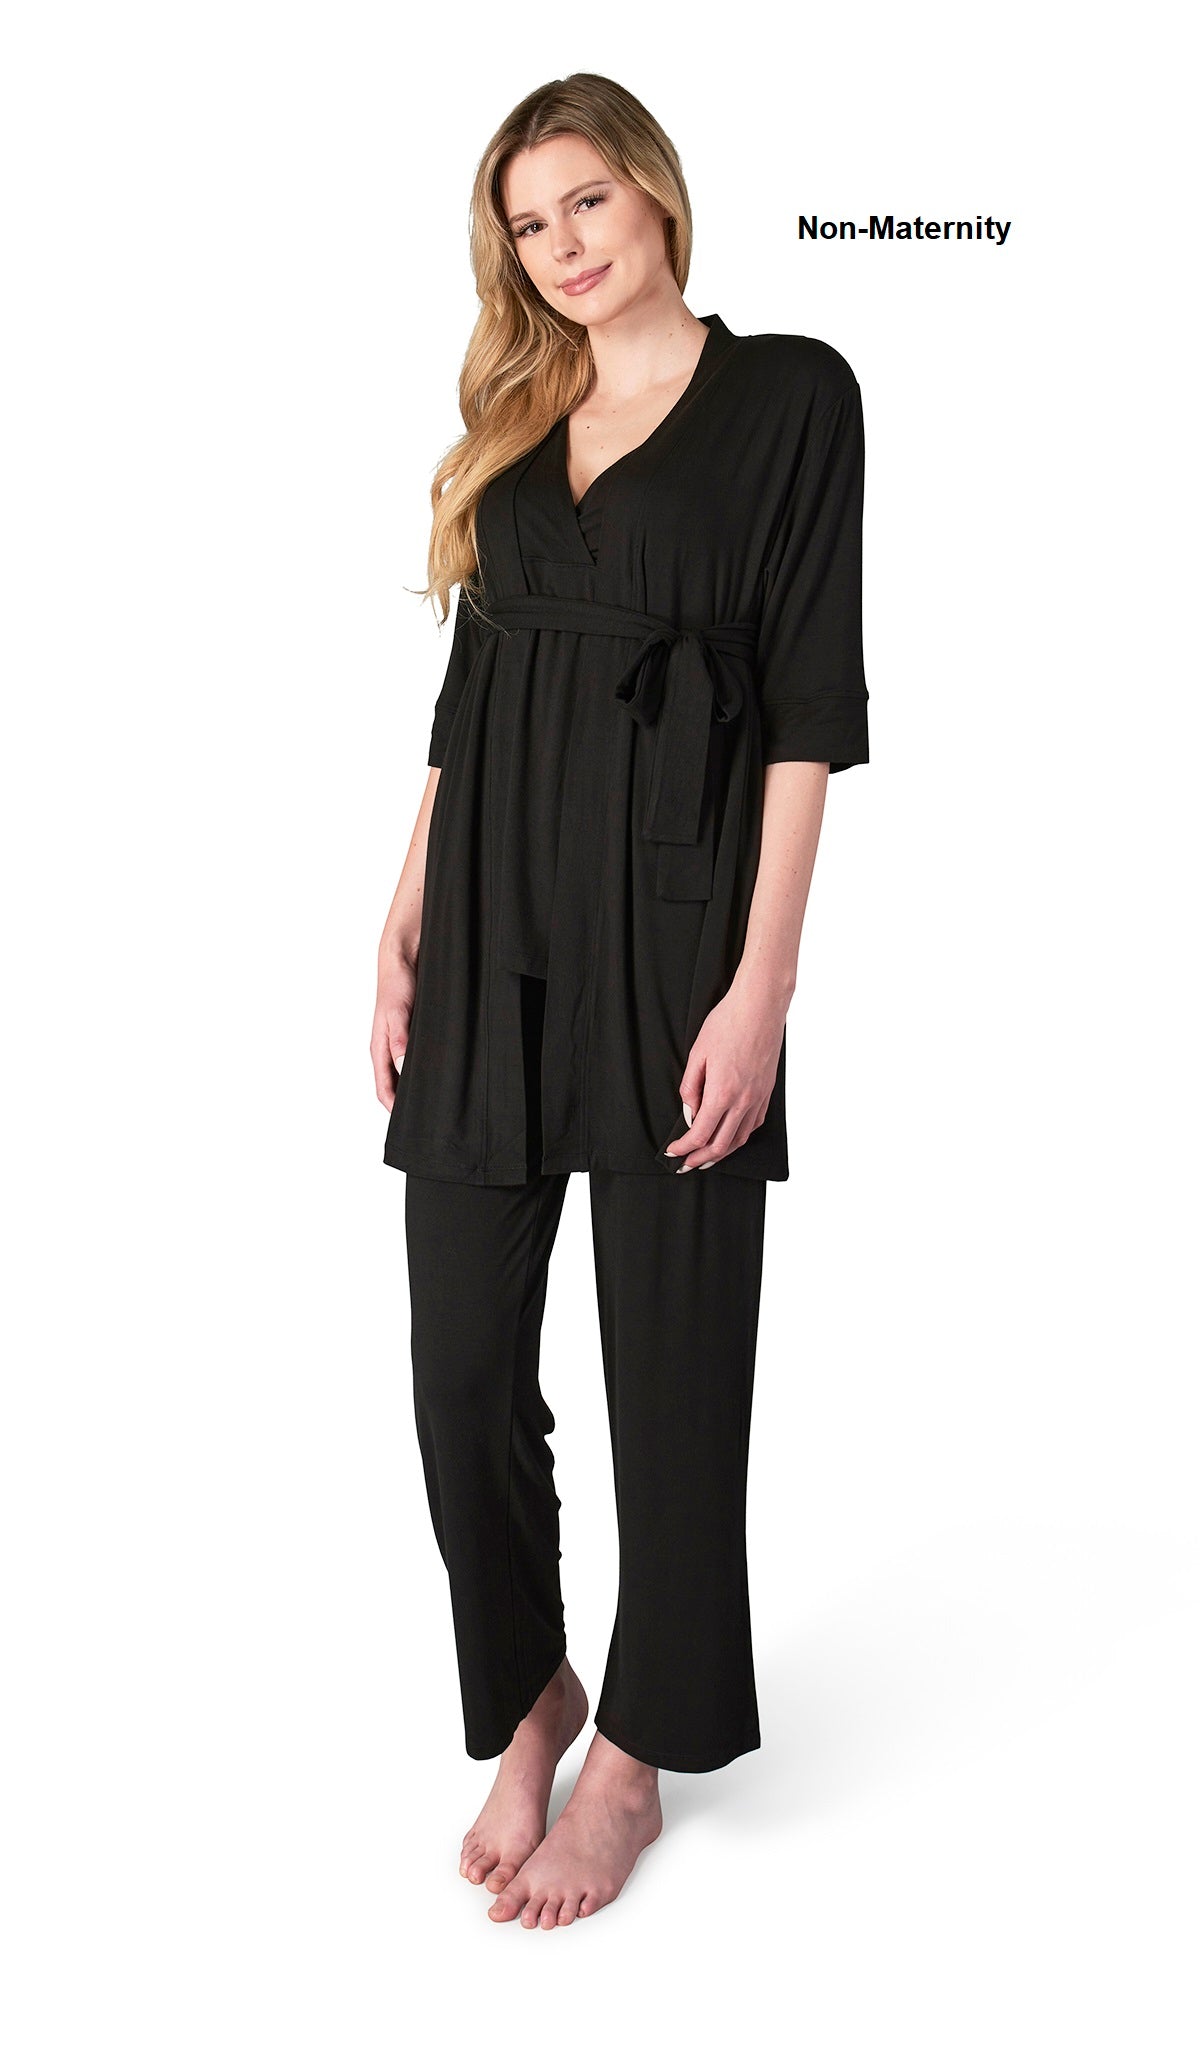 Black Analise 3-Piece Set. Woman wearing 3/4 sleeve robe, tank top and pant as non-maternity.